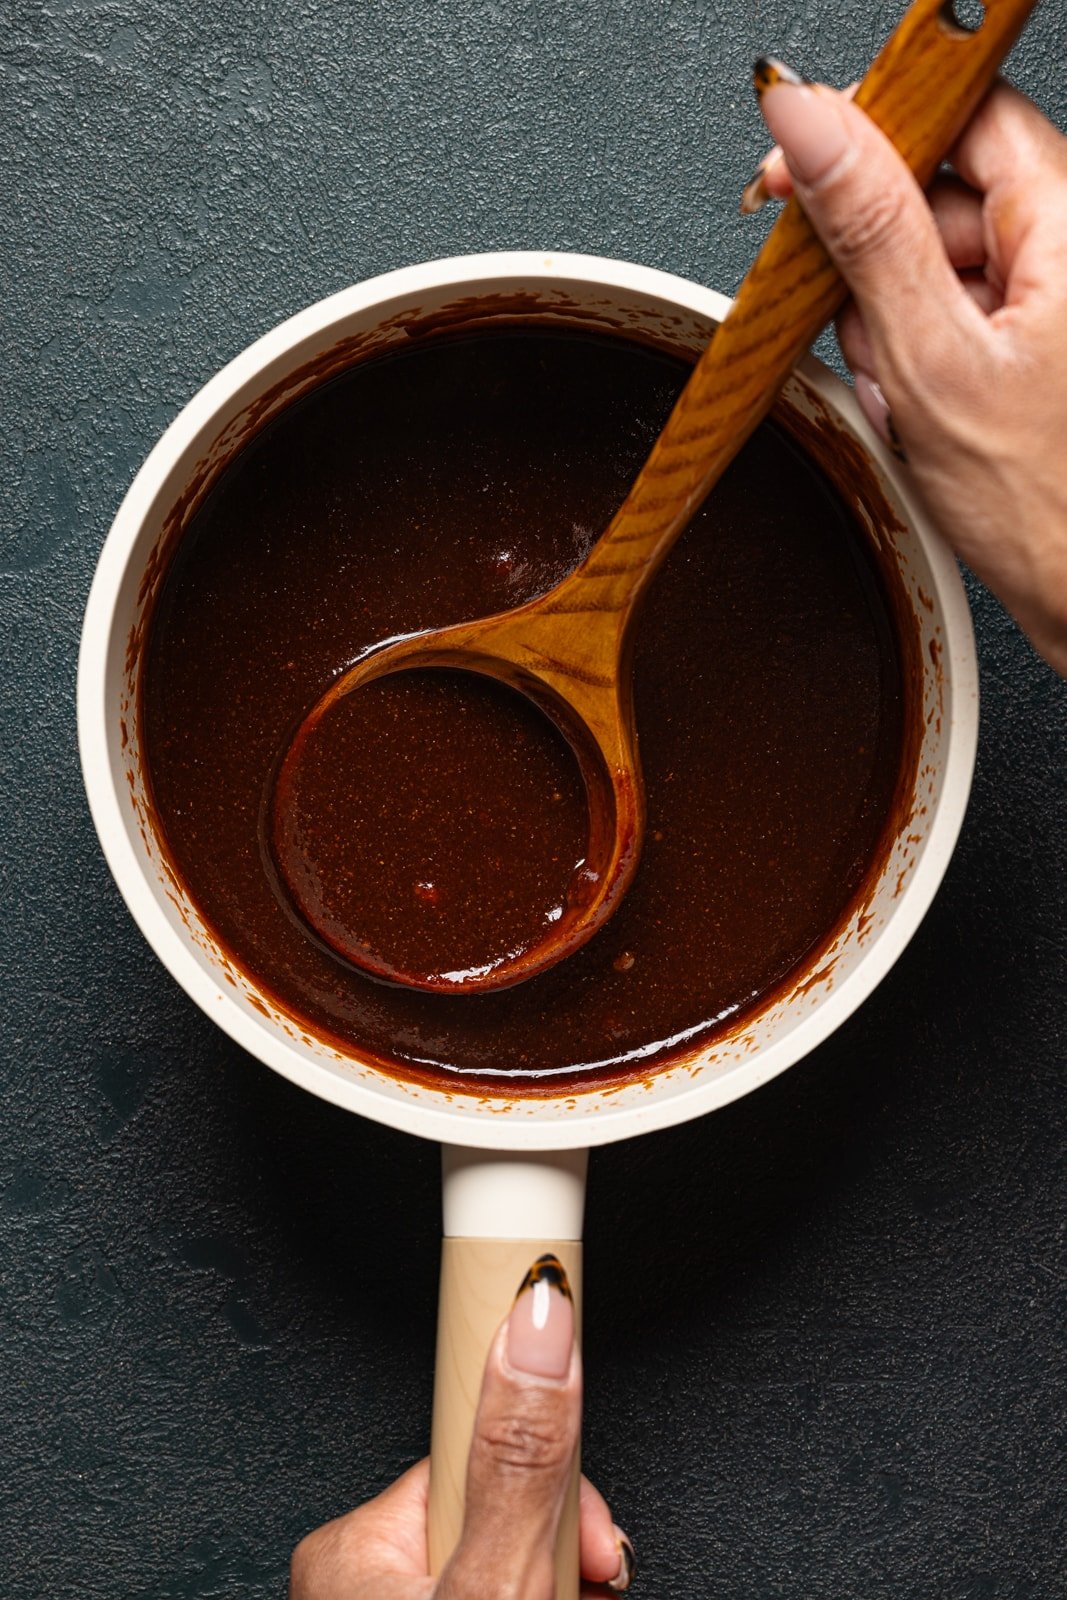 Sauce in a saucepan being held with a wooden spoon.